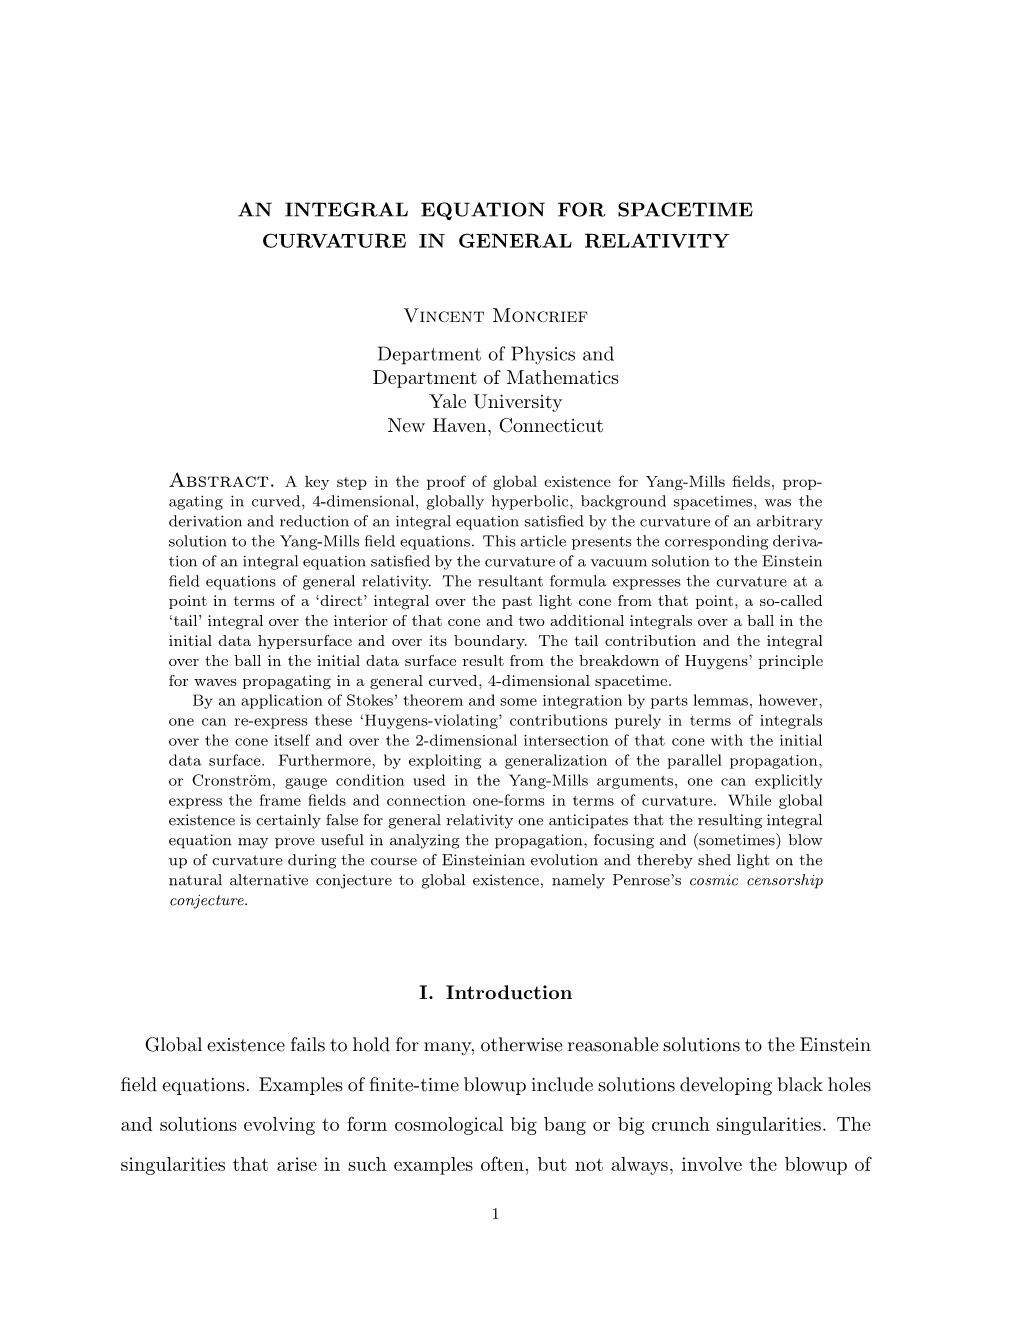 An Integral Equation for Spacetime Curvature in General Relativity